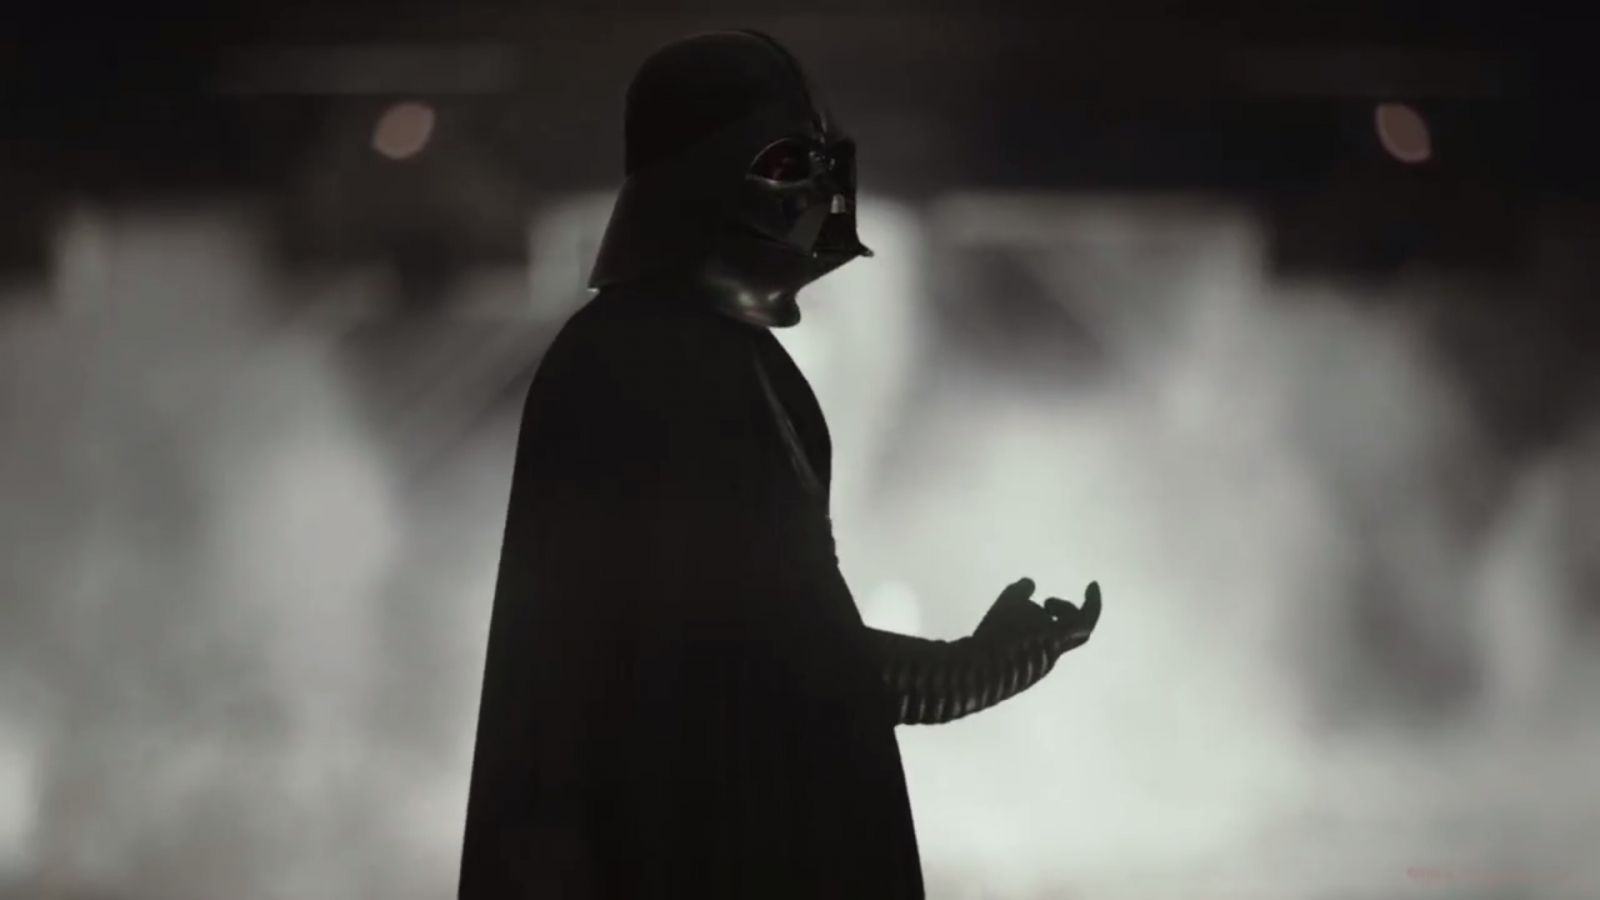 Rogue One's Original Script Saw Darth Vader Force Choke A Main Character To Death